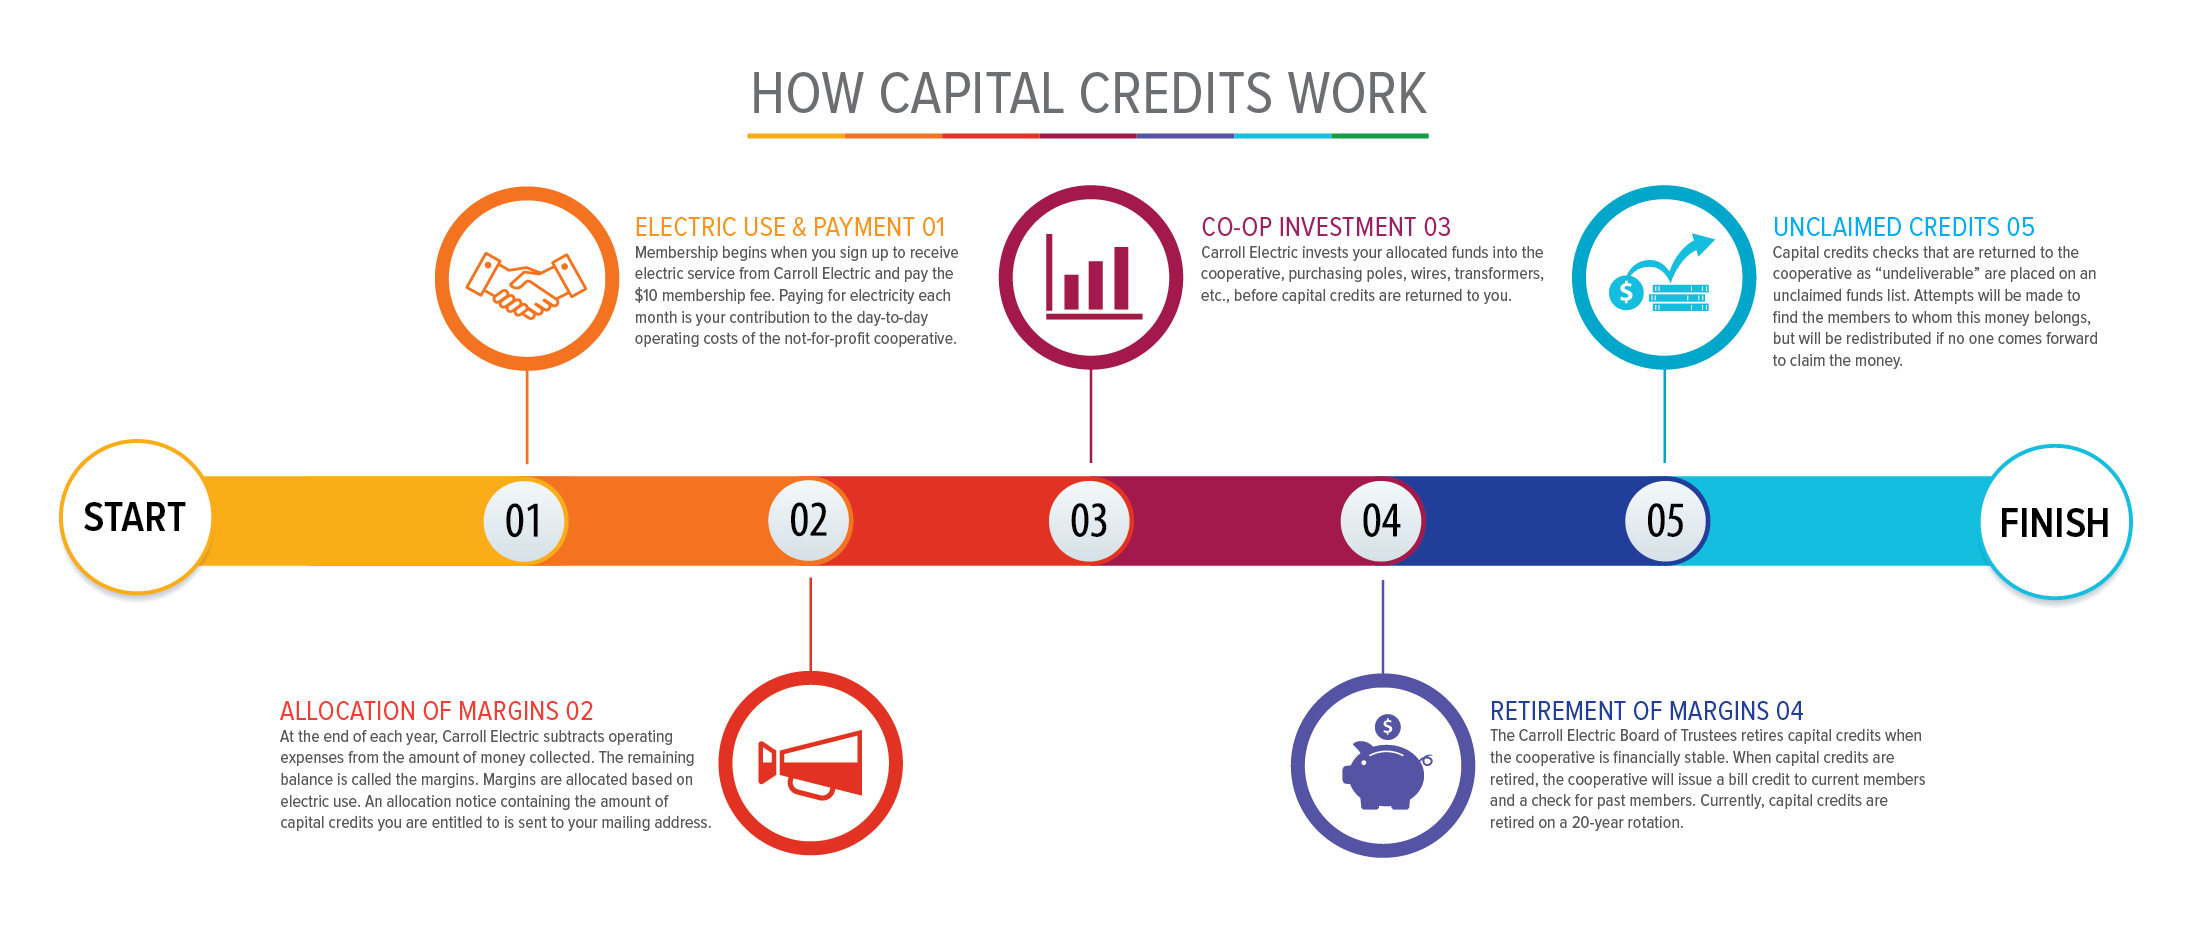 Capital credits are returned to members periodically. 